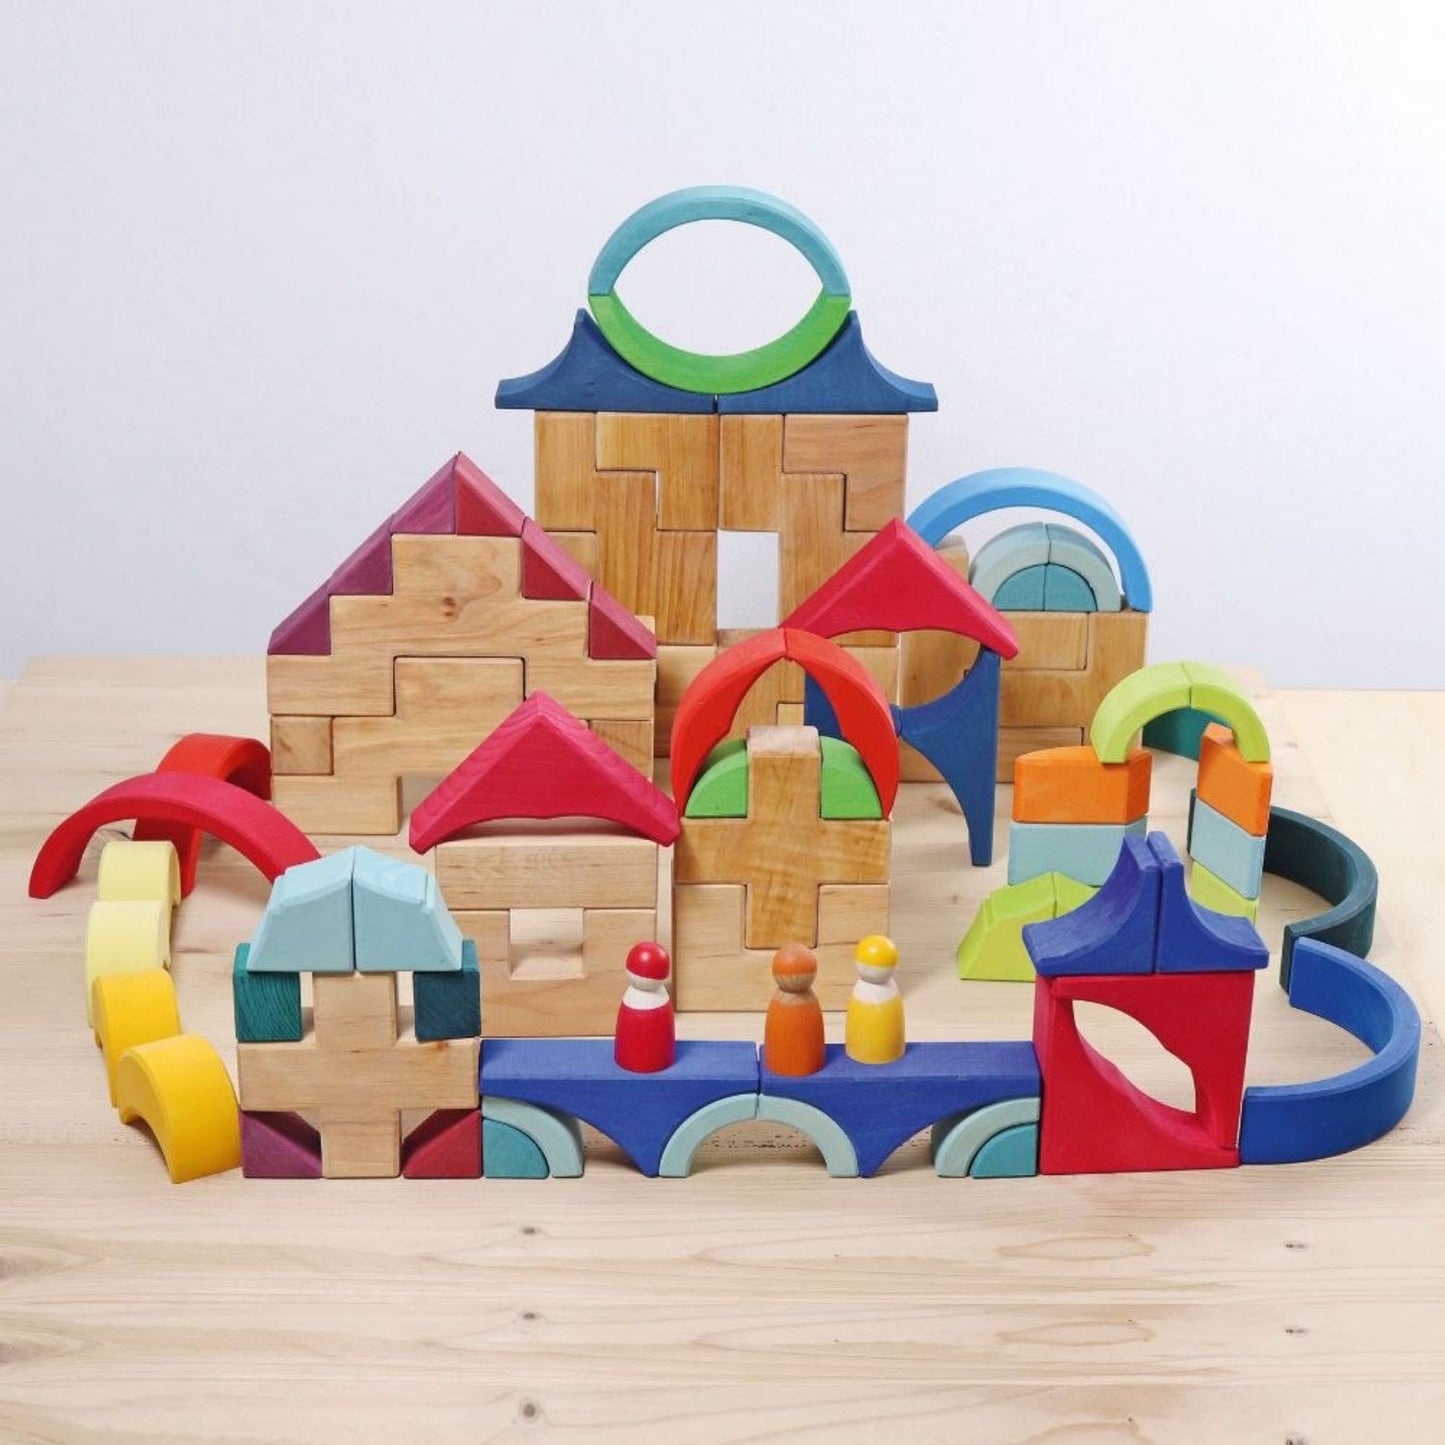 Arcs In Squares | Building Set | Wooden Toys for Kids | Open-Ended Play